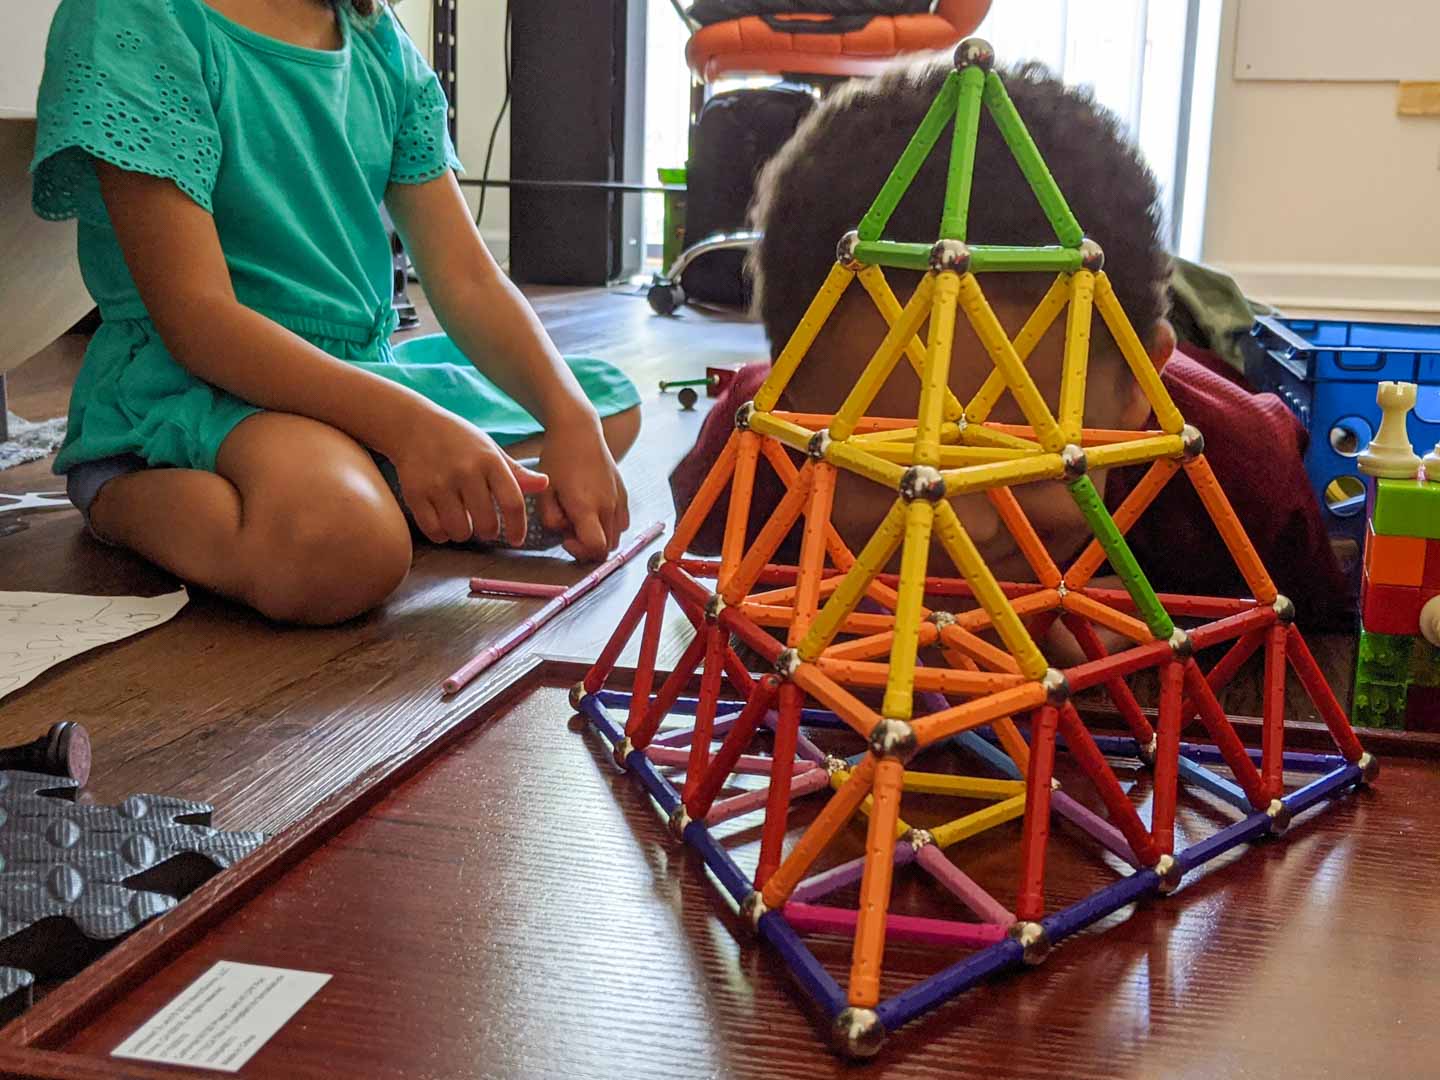 Kids and the Magnet Building Sticks pyramid